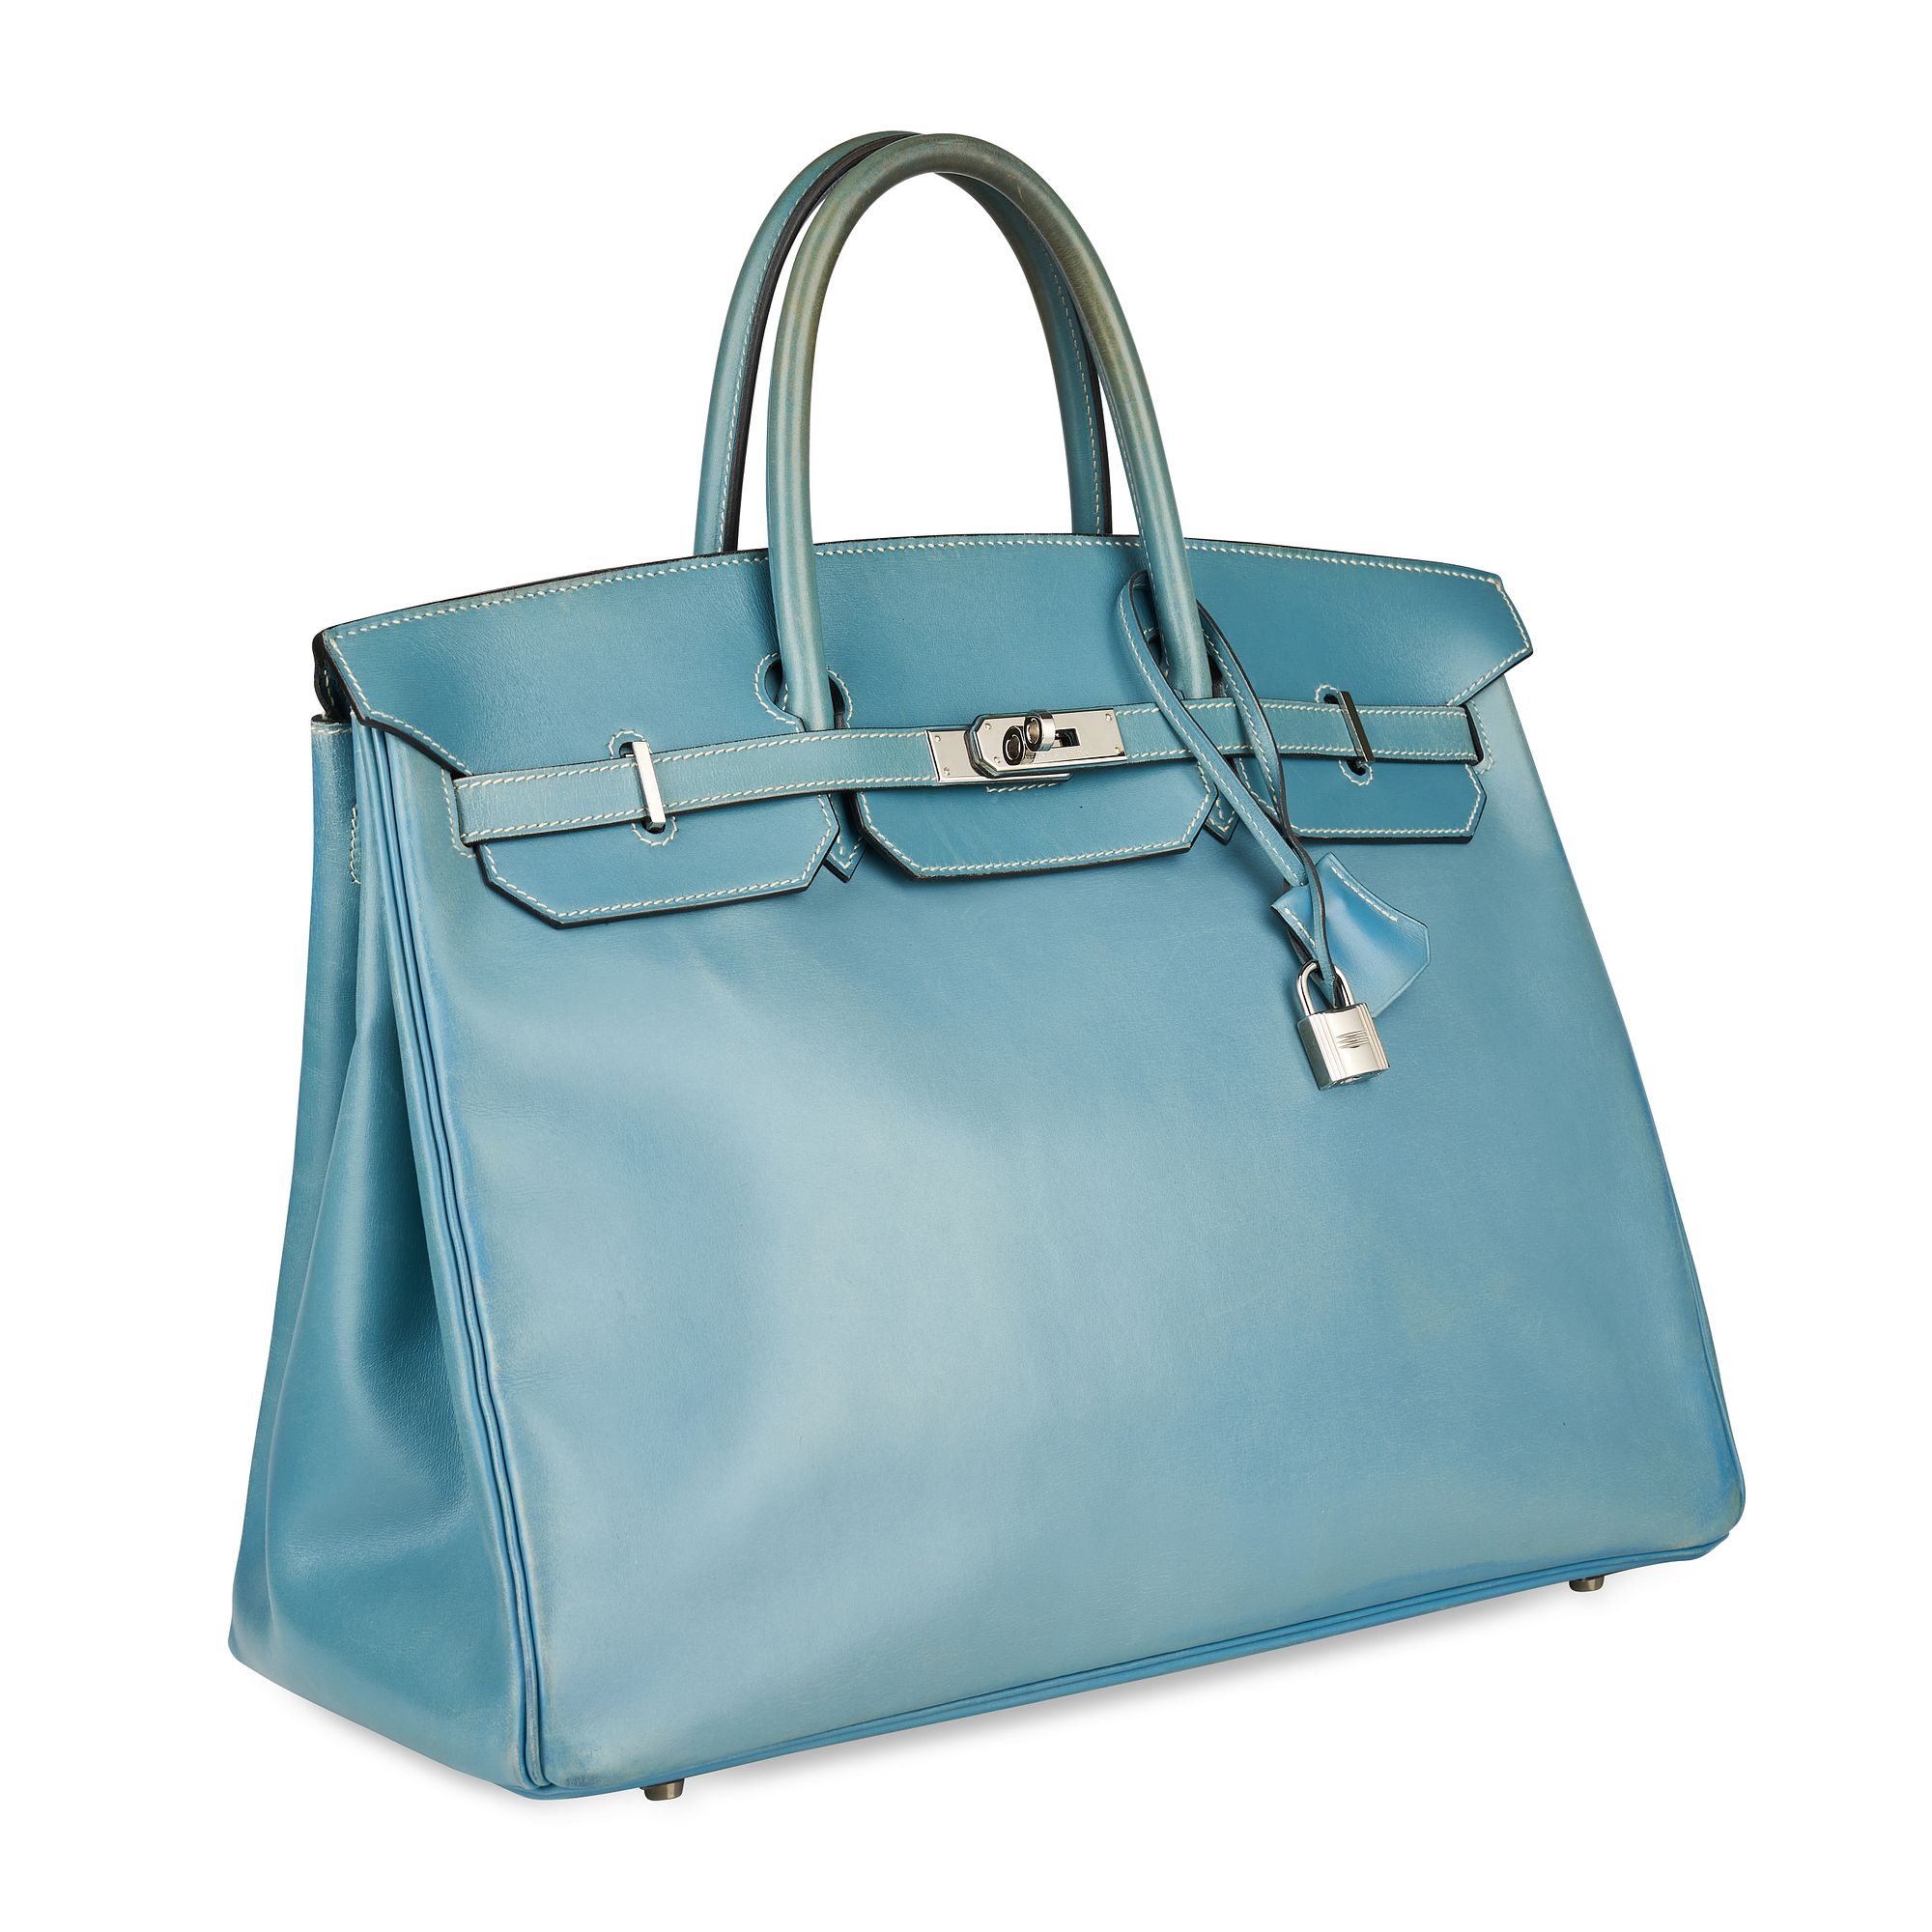 HERMES BLUE BIRKIN 40 BAG Condition grade C+.Â Produced in 2000. 40cm long,  30cm high. Top hand sold at auction on 13th June